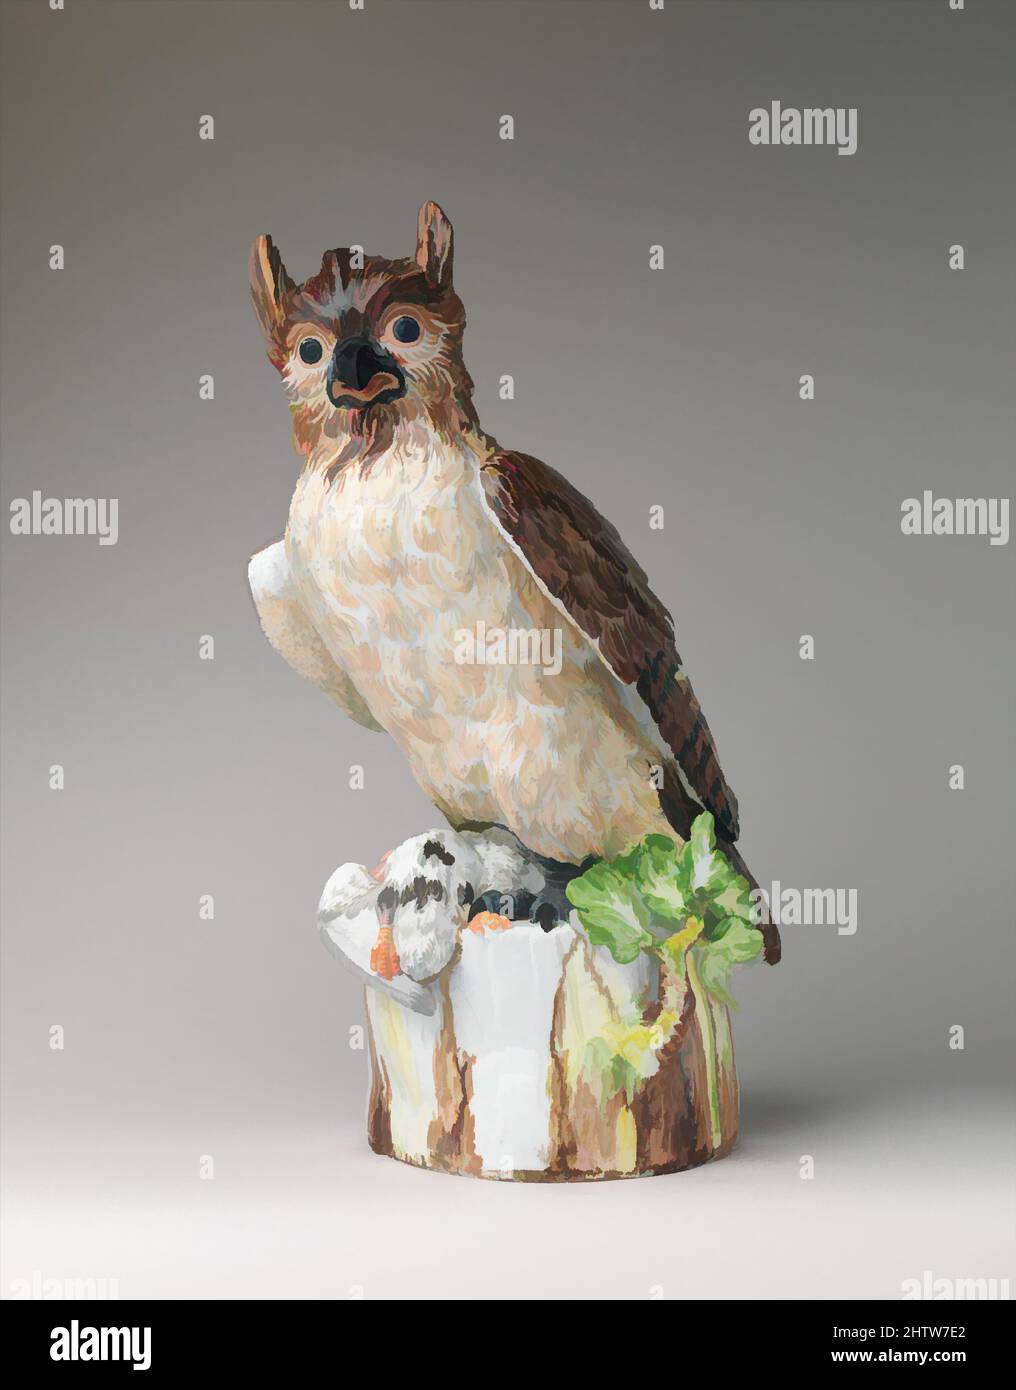 Art inspired by Eagle owl, ca. 1735, German, Meissen, Hard-paste porcelain, Overall (confirmed): 20 1/2 x 11 9/16 x 9 3/8 in., 27.5lb. (52.1 x 29.4 x 23.8 cm, 12.4739kg), Ceramics-Porcelain, This sculpture of an eagle owl is one of five examples of this model delivered in 1736 to the, Classic works modernized by Artotop with a splash of modernity. Shapes, color and value, eye-catching visual impact on art. Emotions through freedom of artworks in a contemporary way. A timeless message pursuing a wildly creative new direction. Artists turning to the digital medium and creating the Artotop NFT Stock Photo